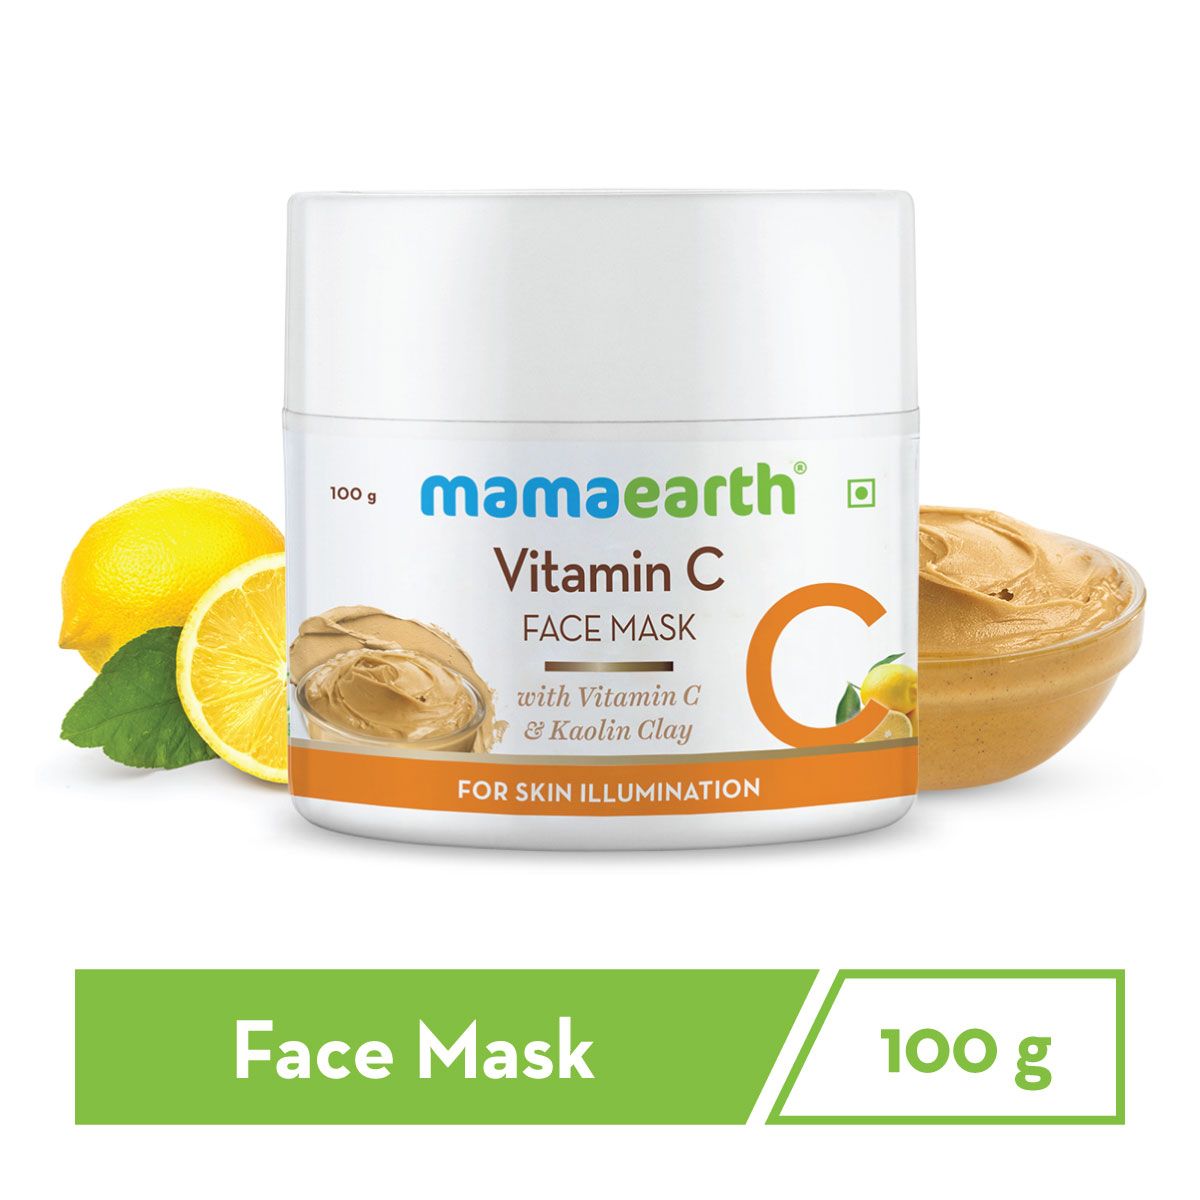 Mamaearth Vitamin C Face Mask Better Than Others Available In The Market